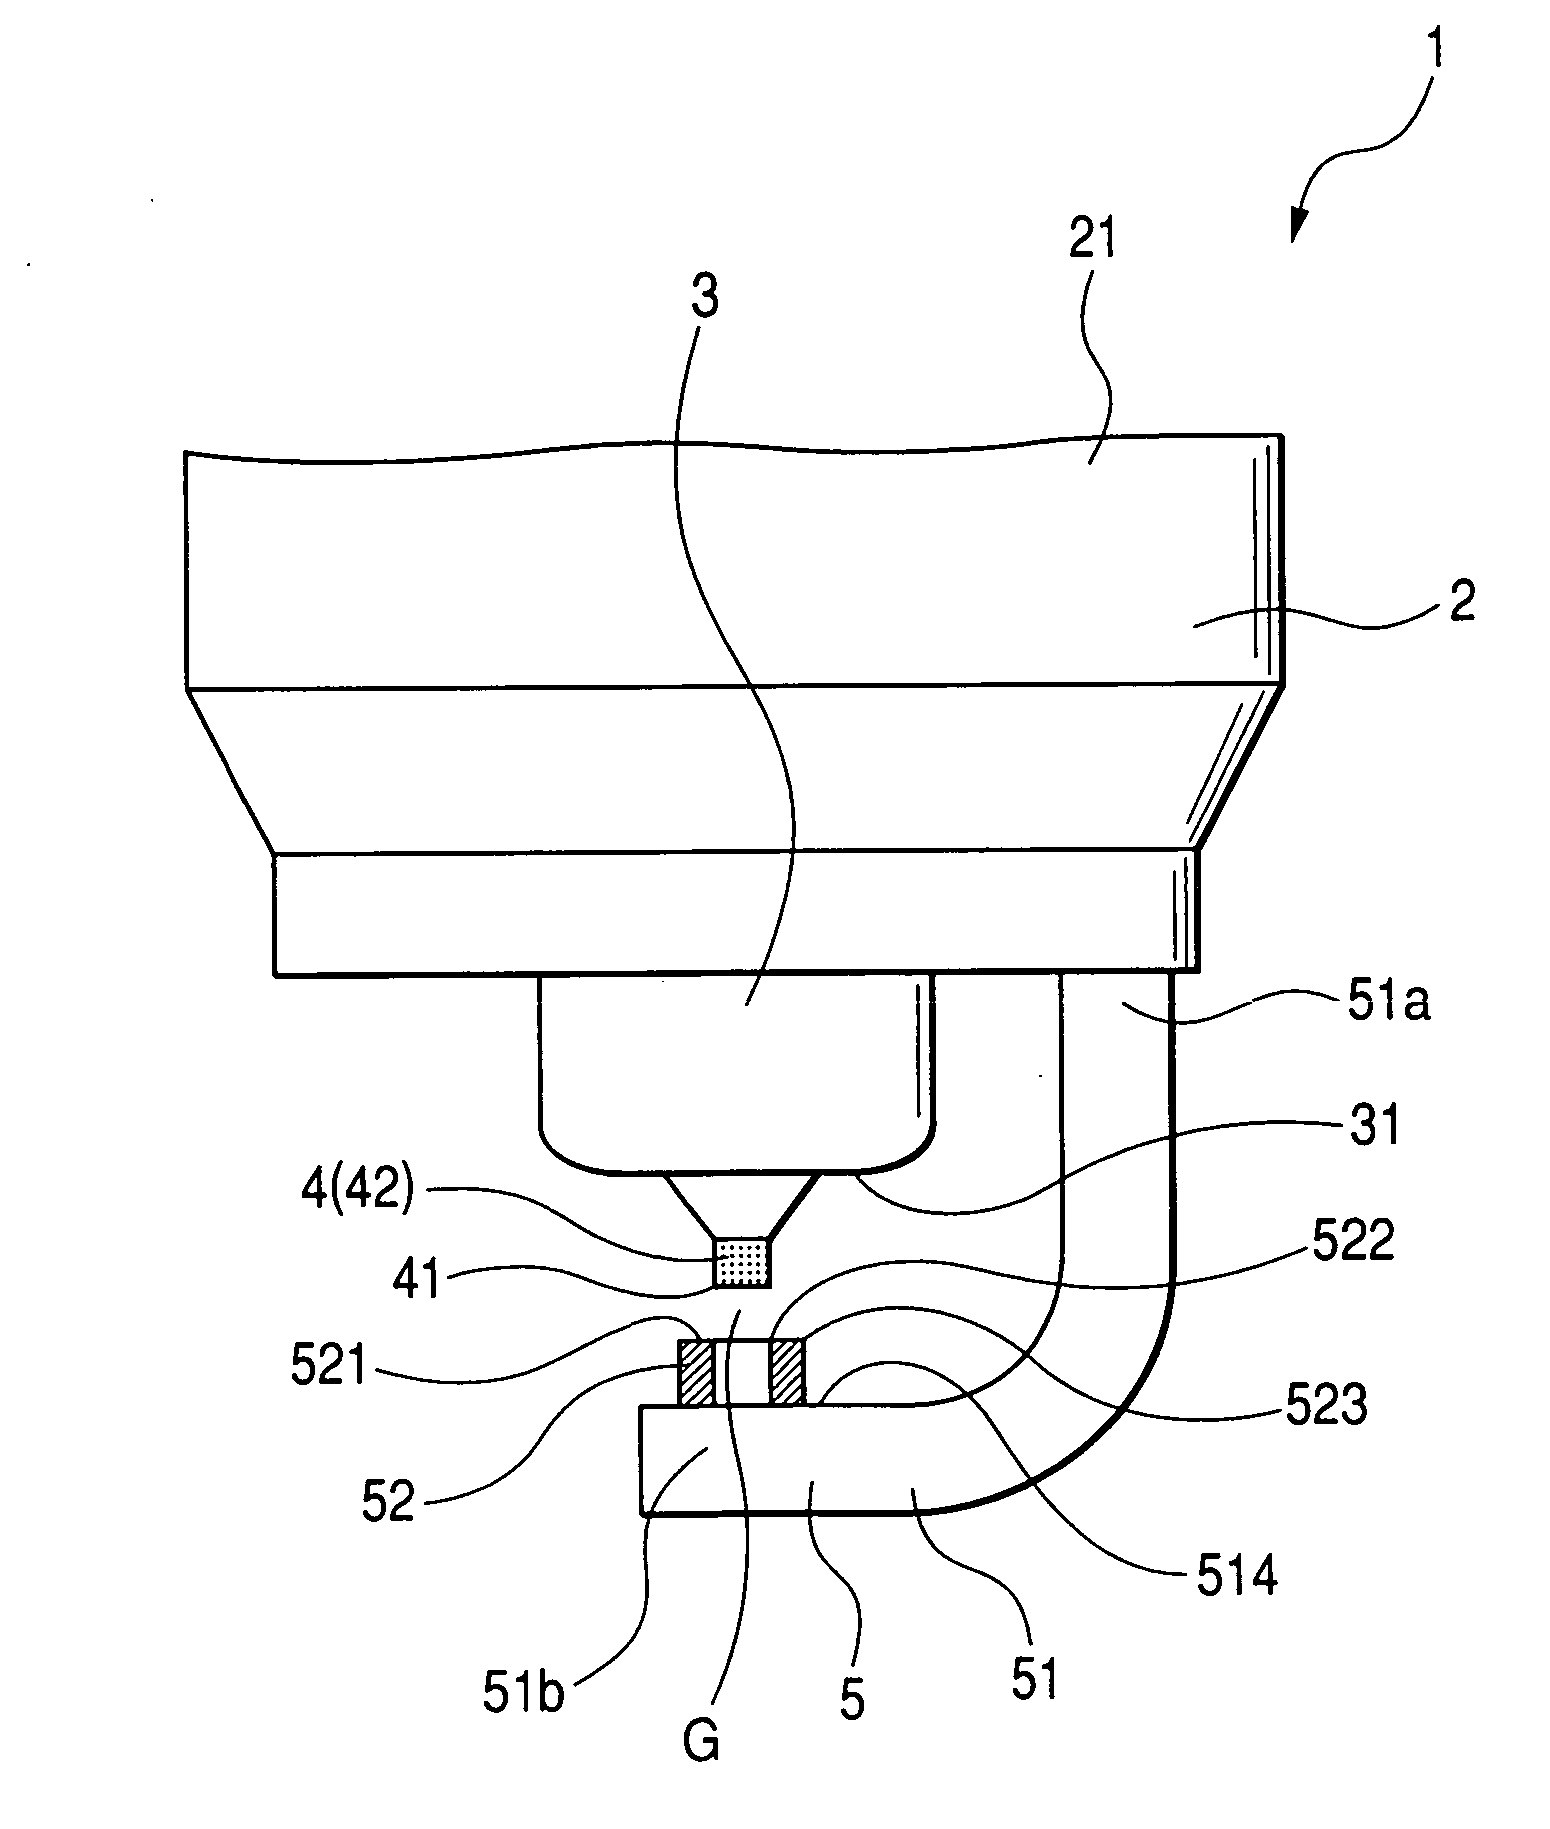 Spark plug having ground electrode protruding member with inner and outer edges